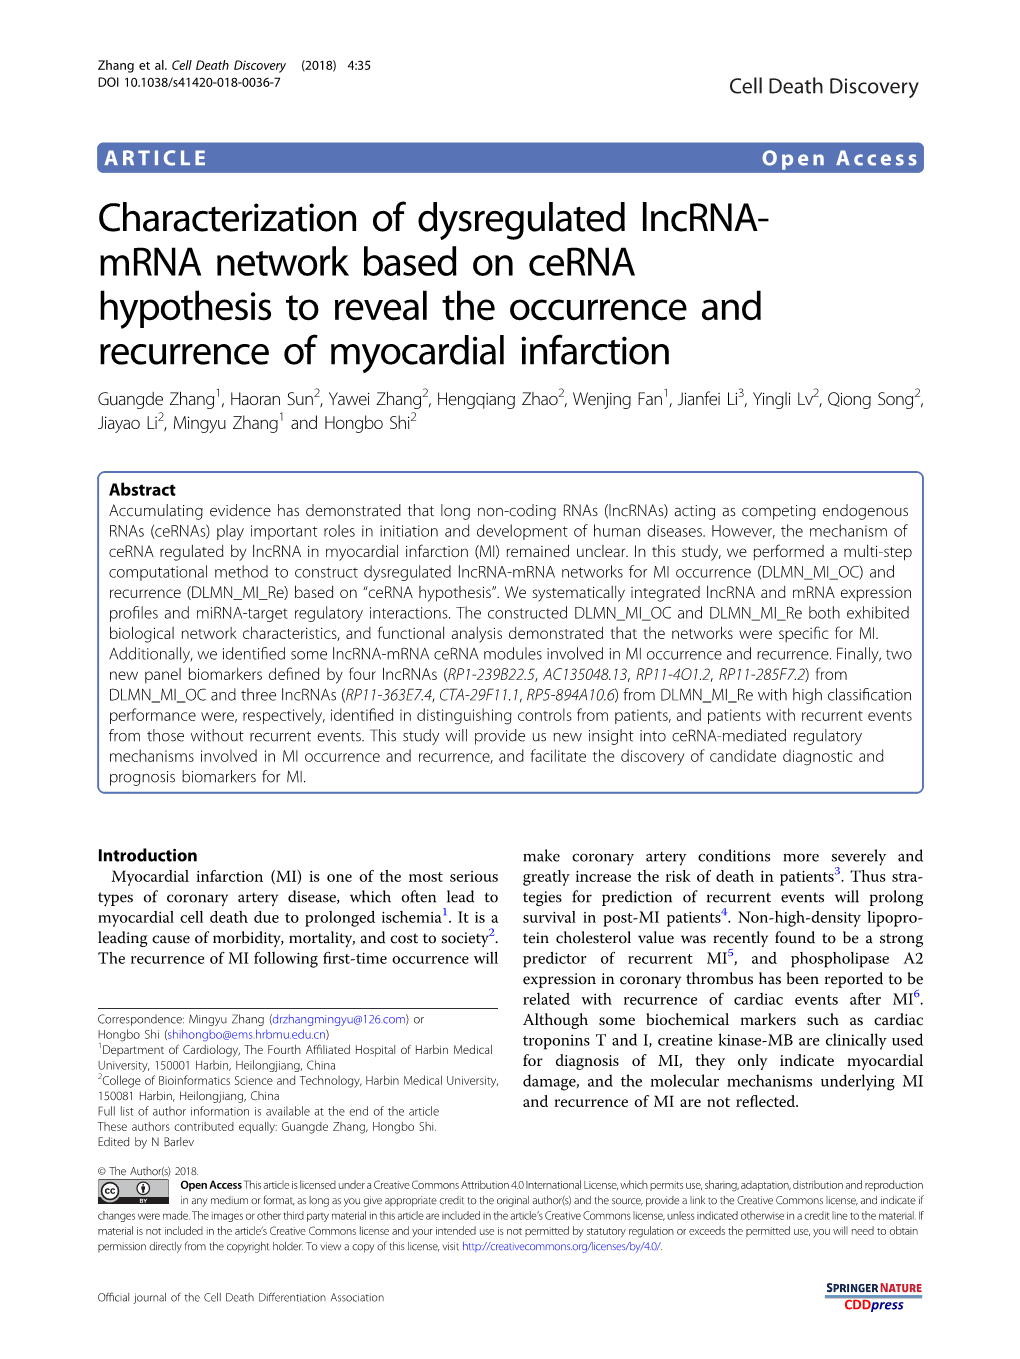 Characterization of Dysregulated Lncrna-Mrna Network Based on Cerna Hypothesis to Reveal the Occurrence and Recurrence of Myocar